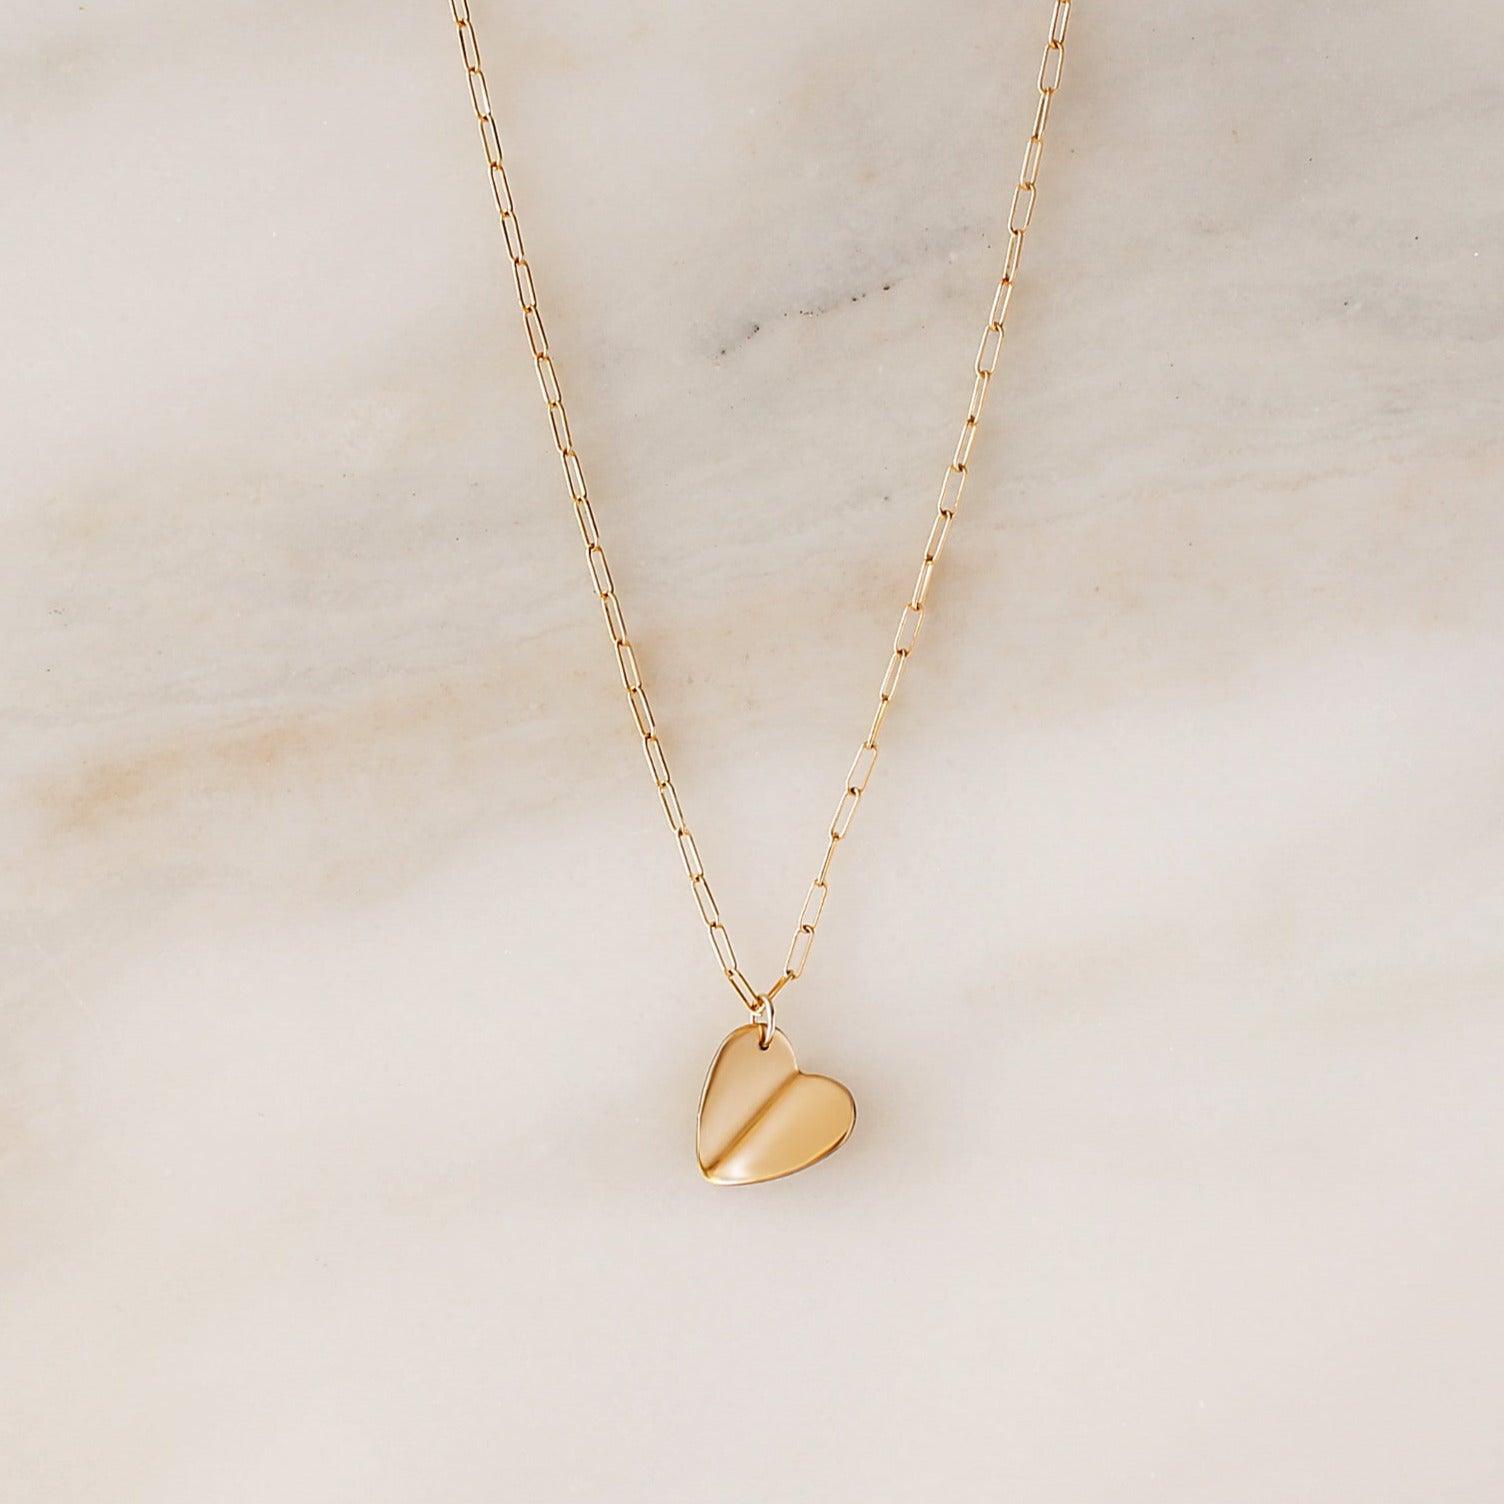 Paper Heart Necklace - Nolia Jewelry - Meaningful + Sustainably Handcrafted Jewelry